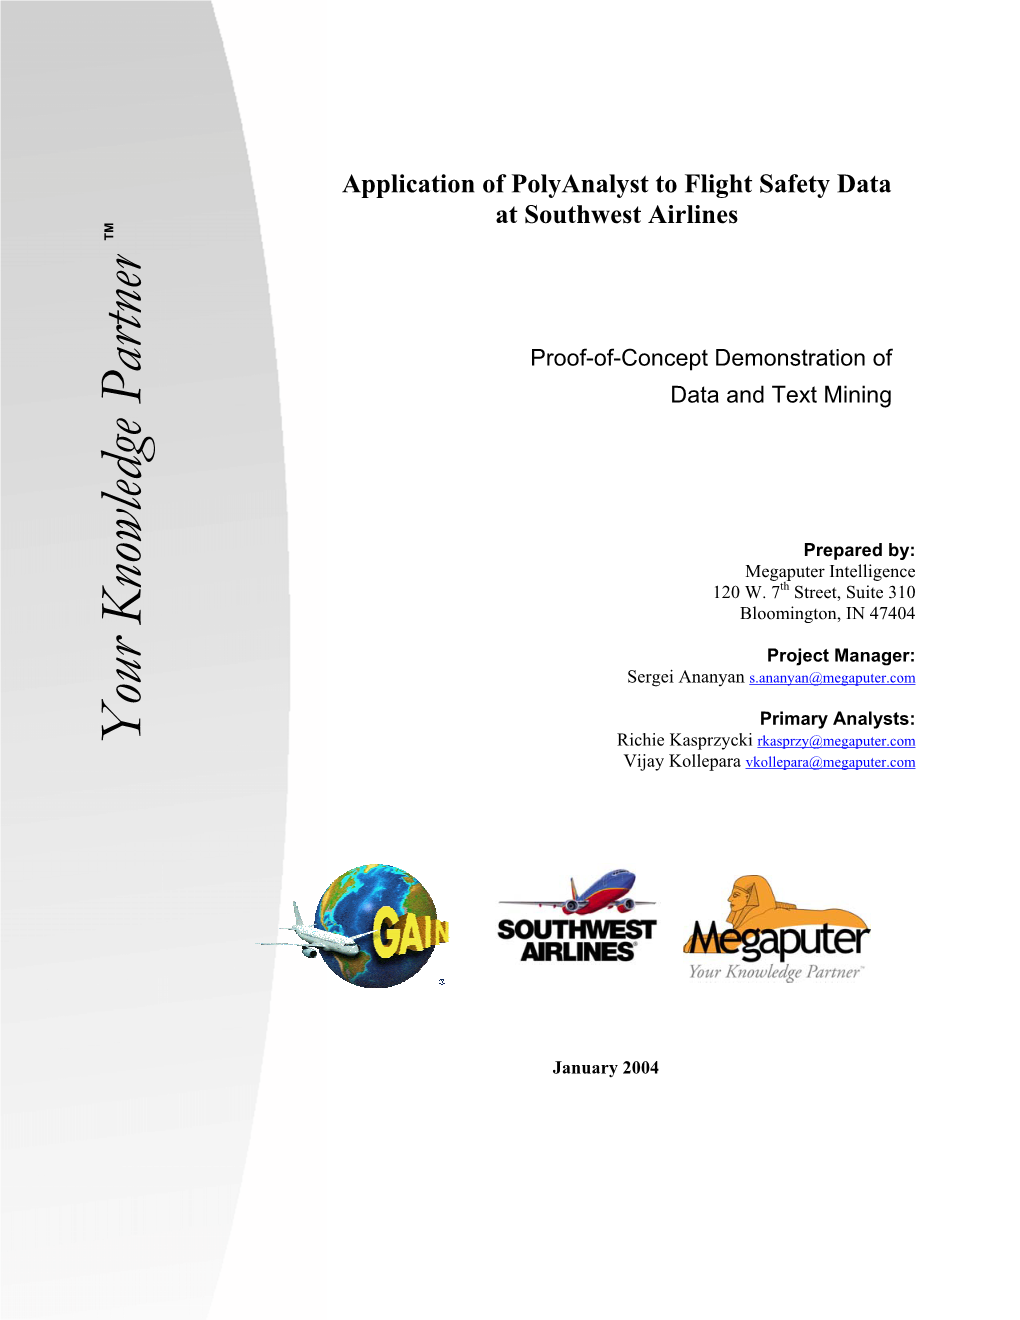 Application of Polyanalyst to Flight Safety Datat Southwest Airlines